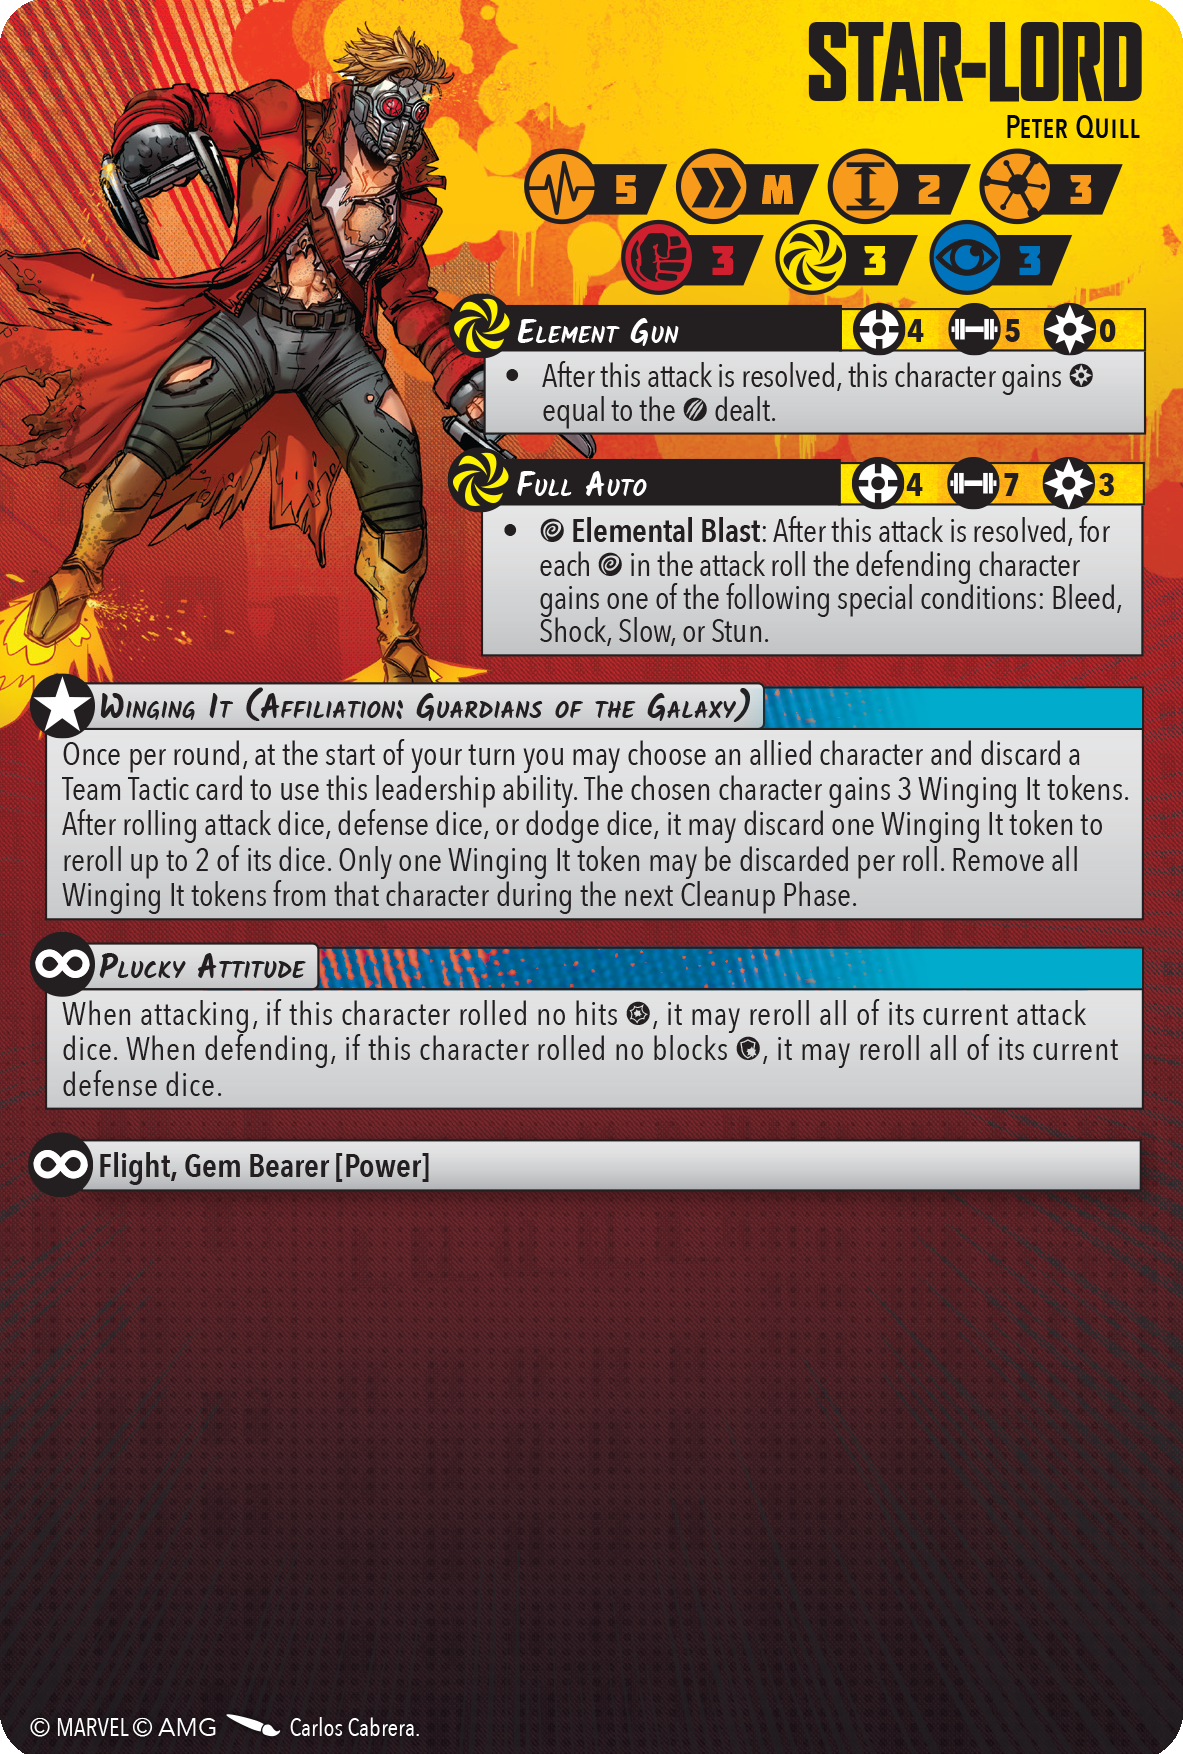 Atomic Mass Games Marvel: Crisis Protocol - Star-Lord Character Pack